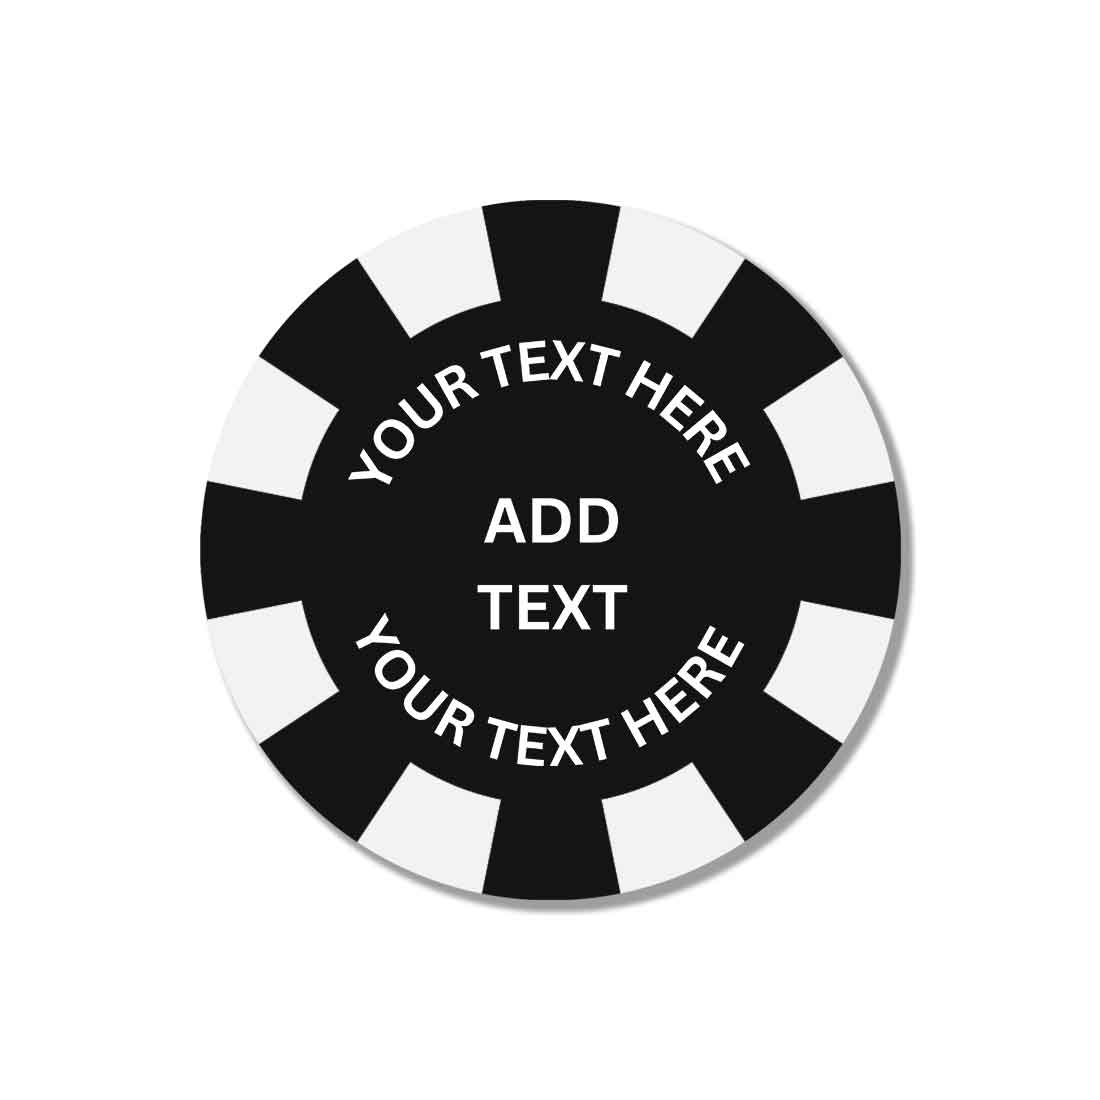 Personalized Chips for Casino with Your Text on Poker Coin - Add Text